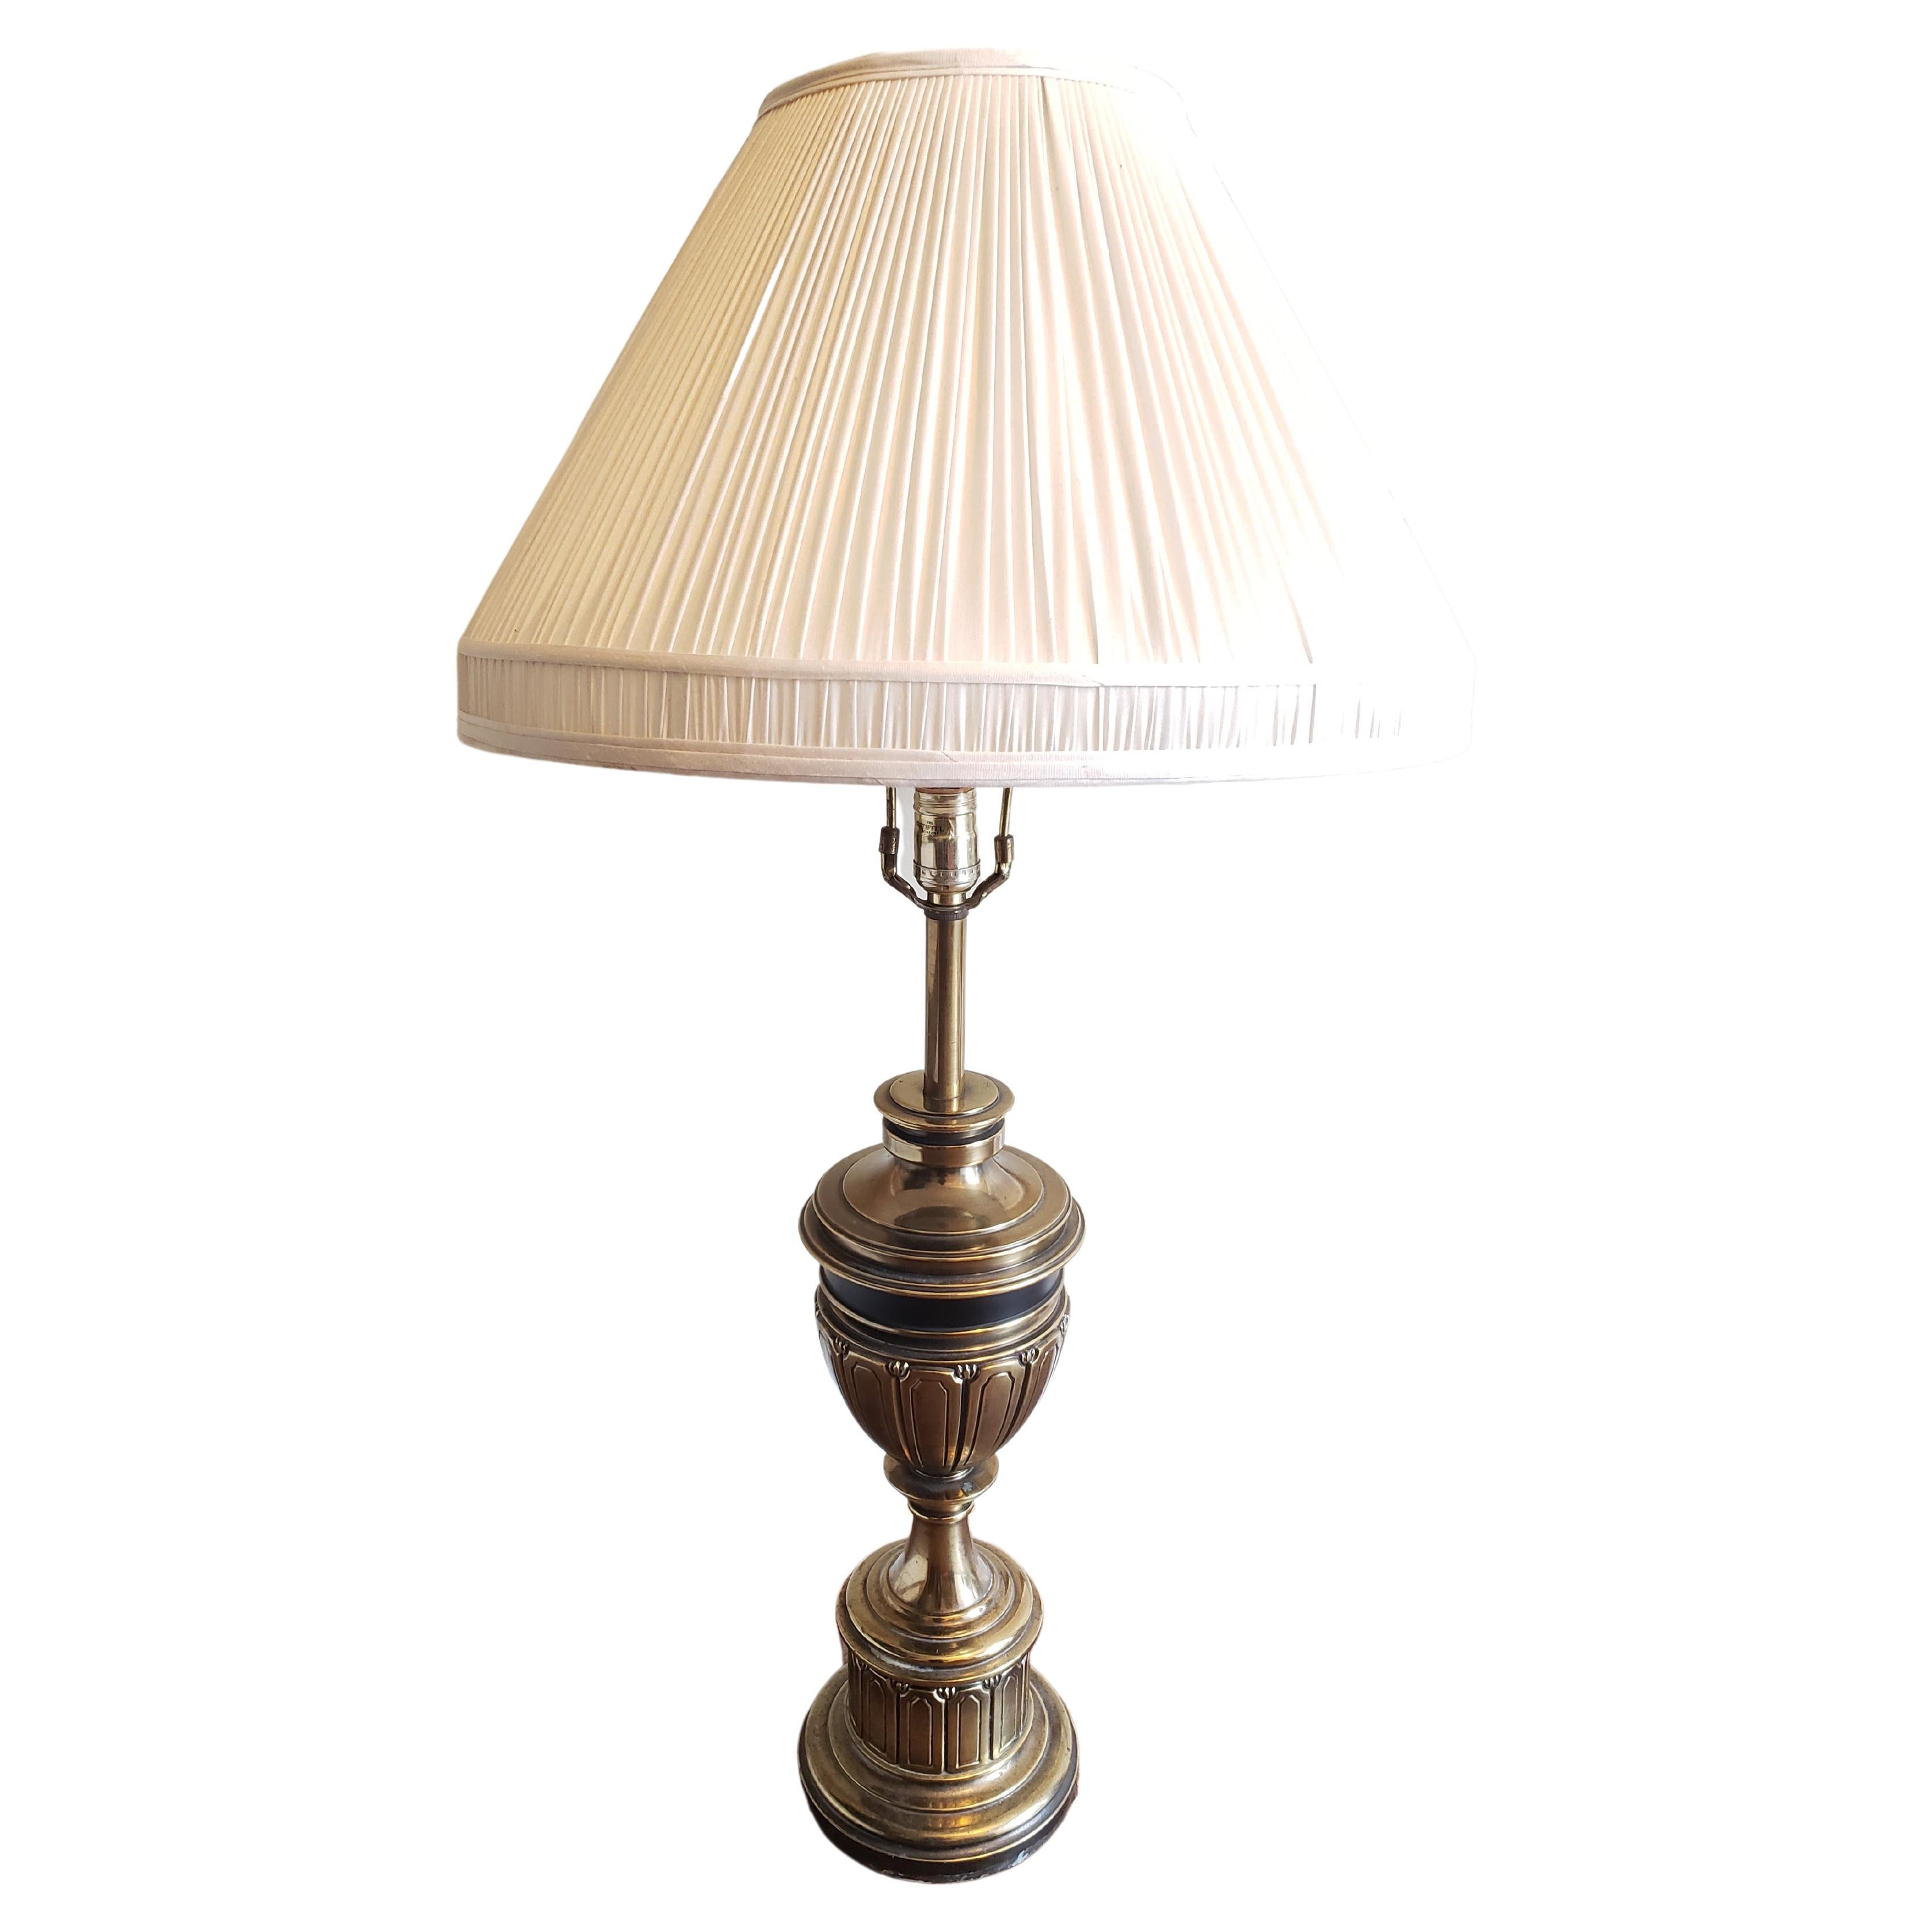 20th Century Stiffel Solid Brass Trophy Table Lamp, circa 1960s For Sale